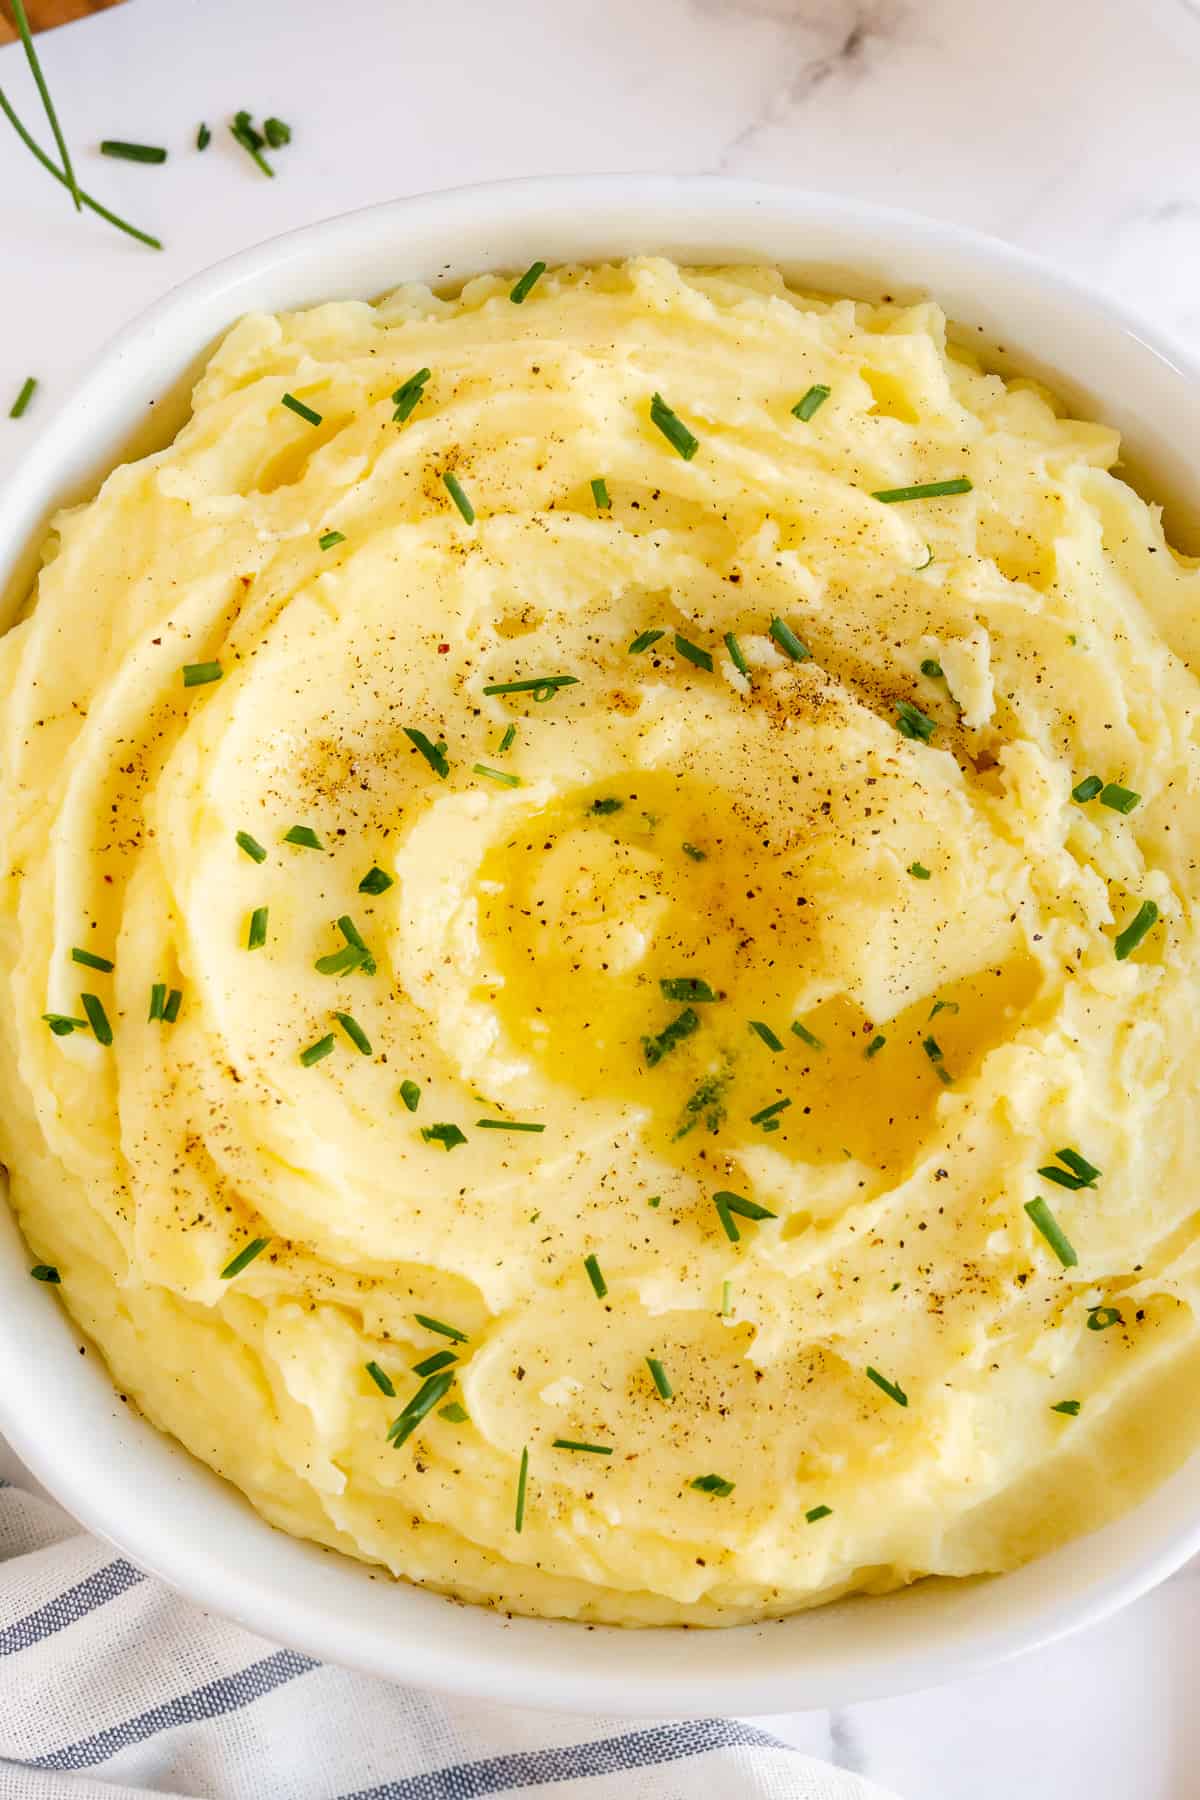 Mashed potatoes in a white bowl topped with butter and chives